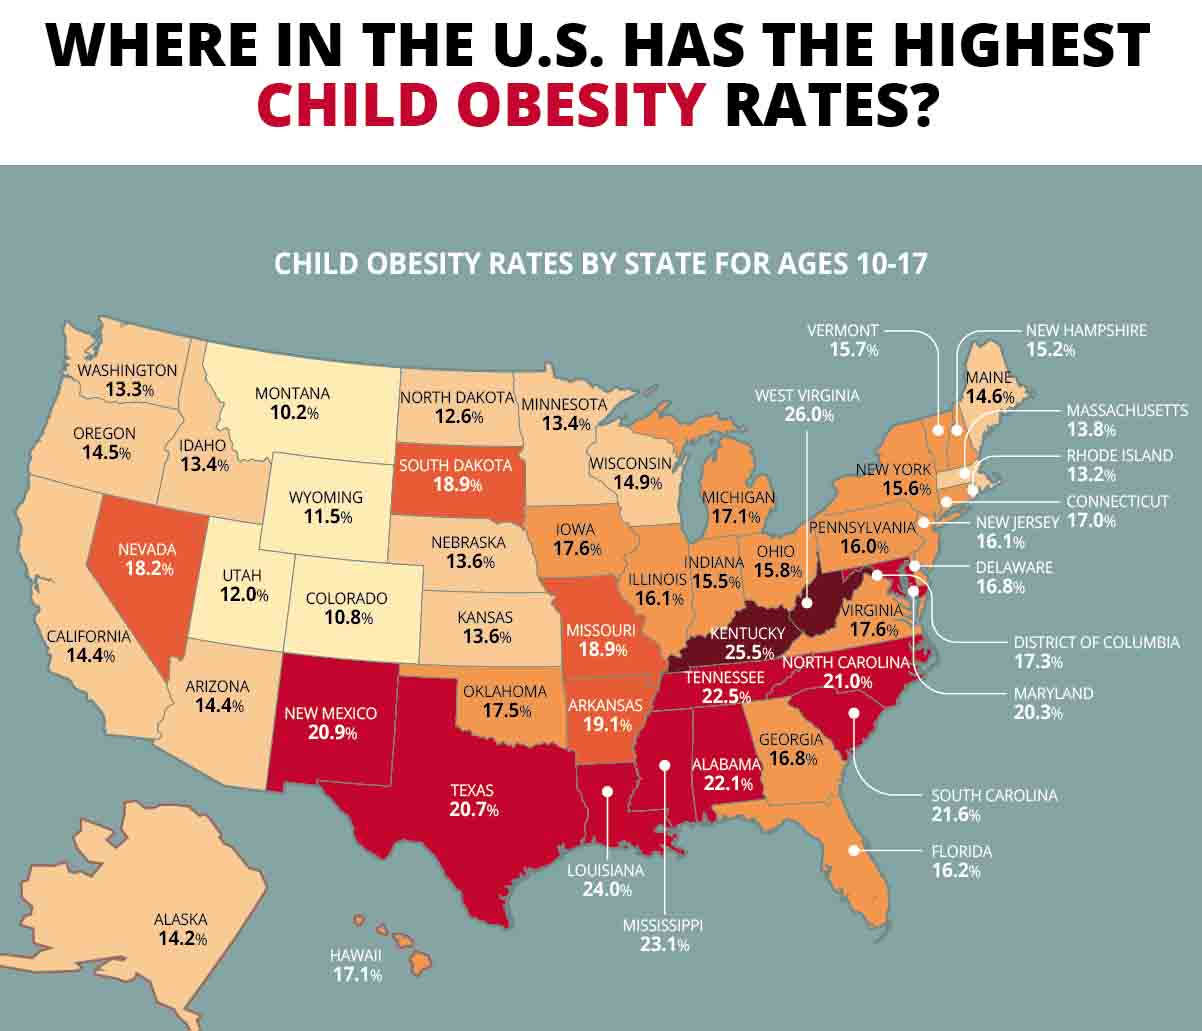 Where in the U.S. Has the Highest Childhood Obesity Rates? (Infographic)